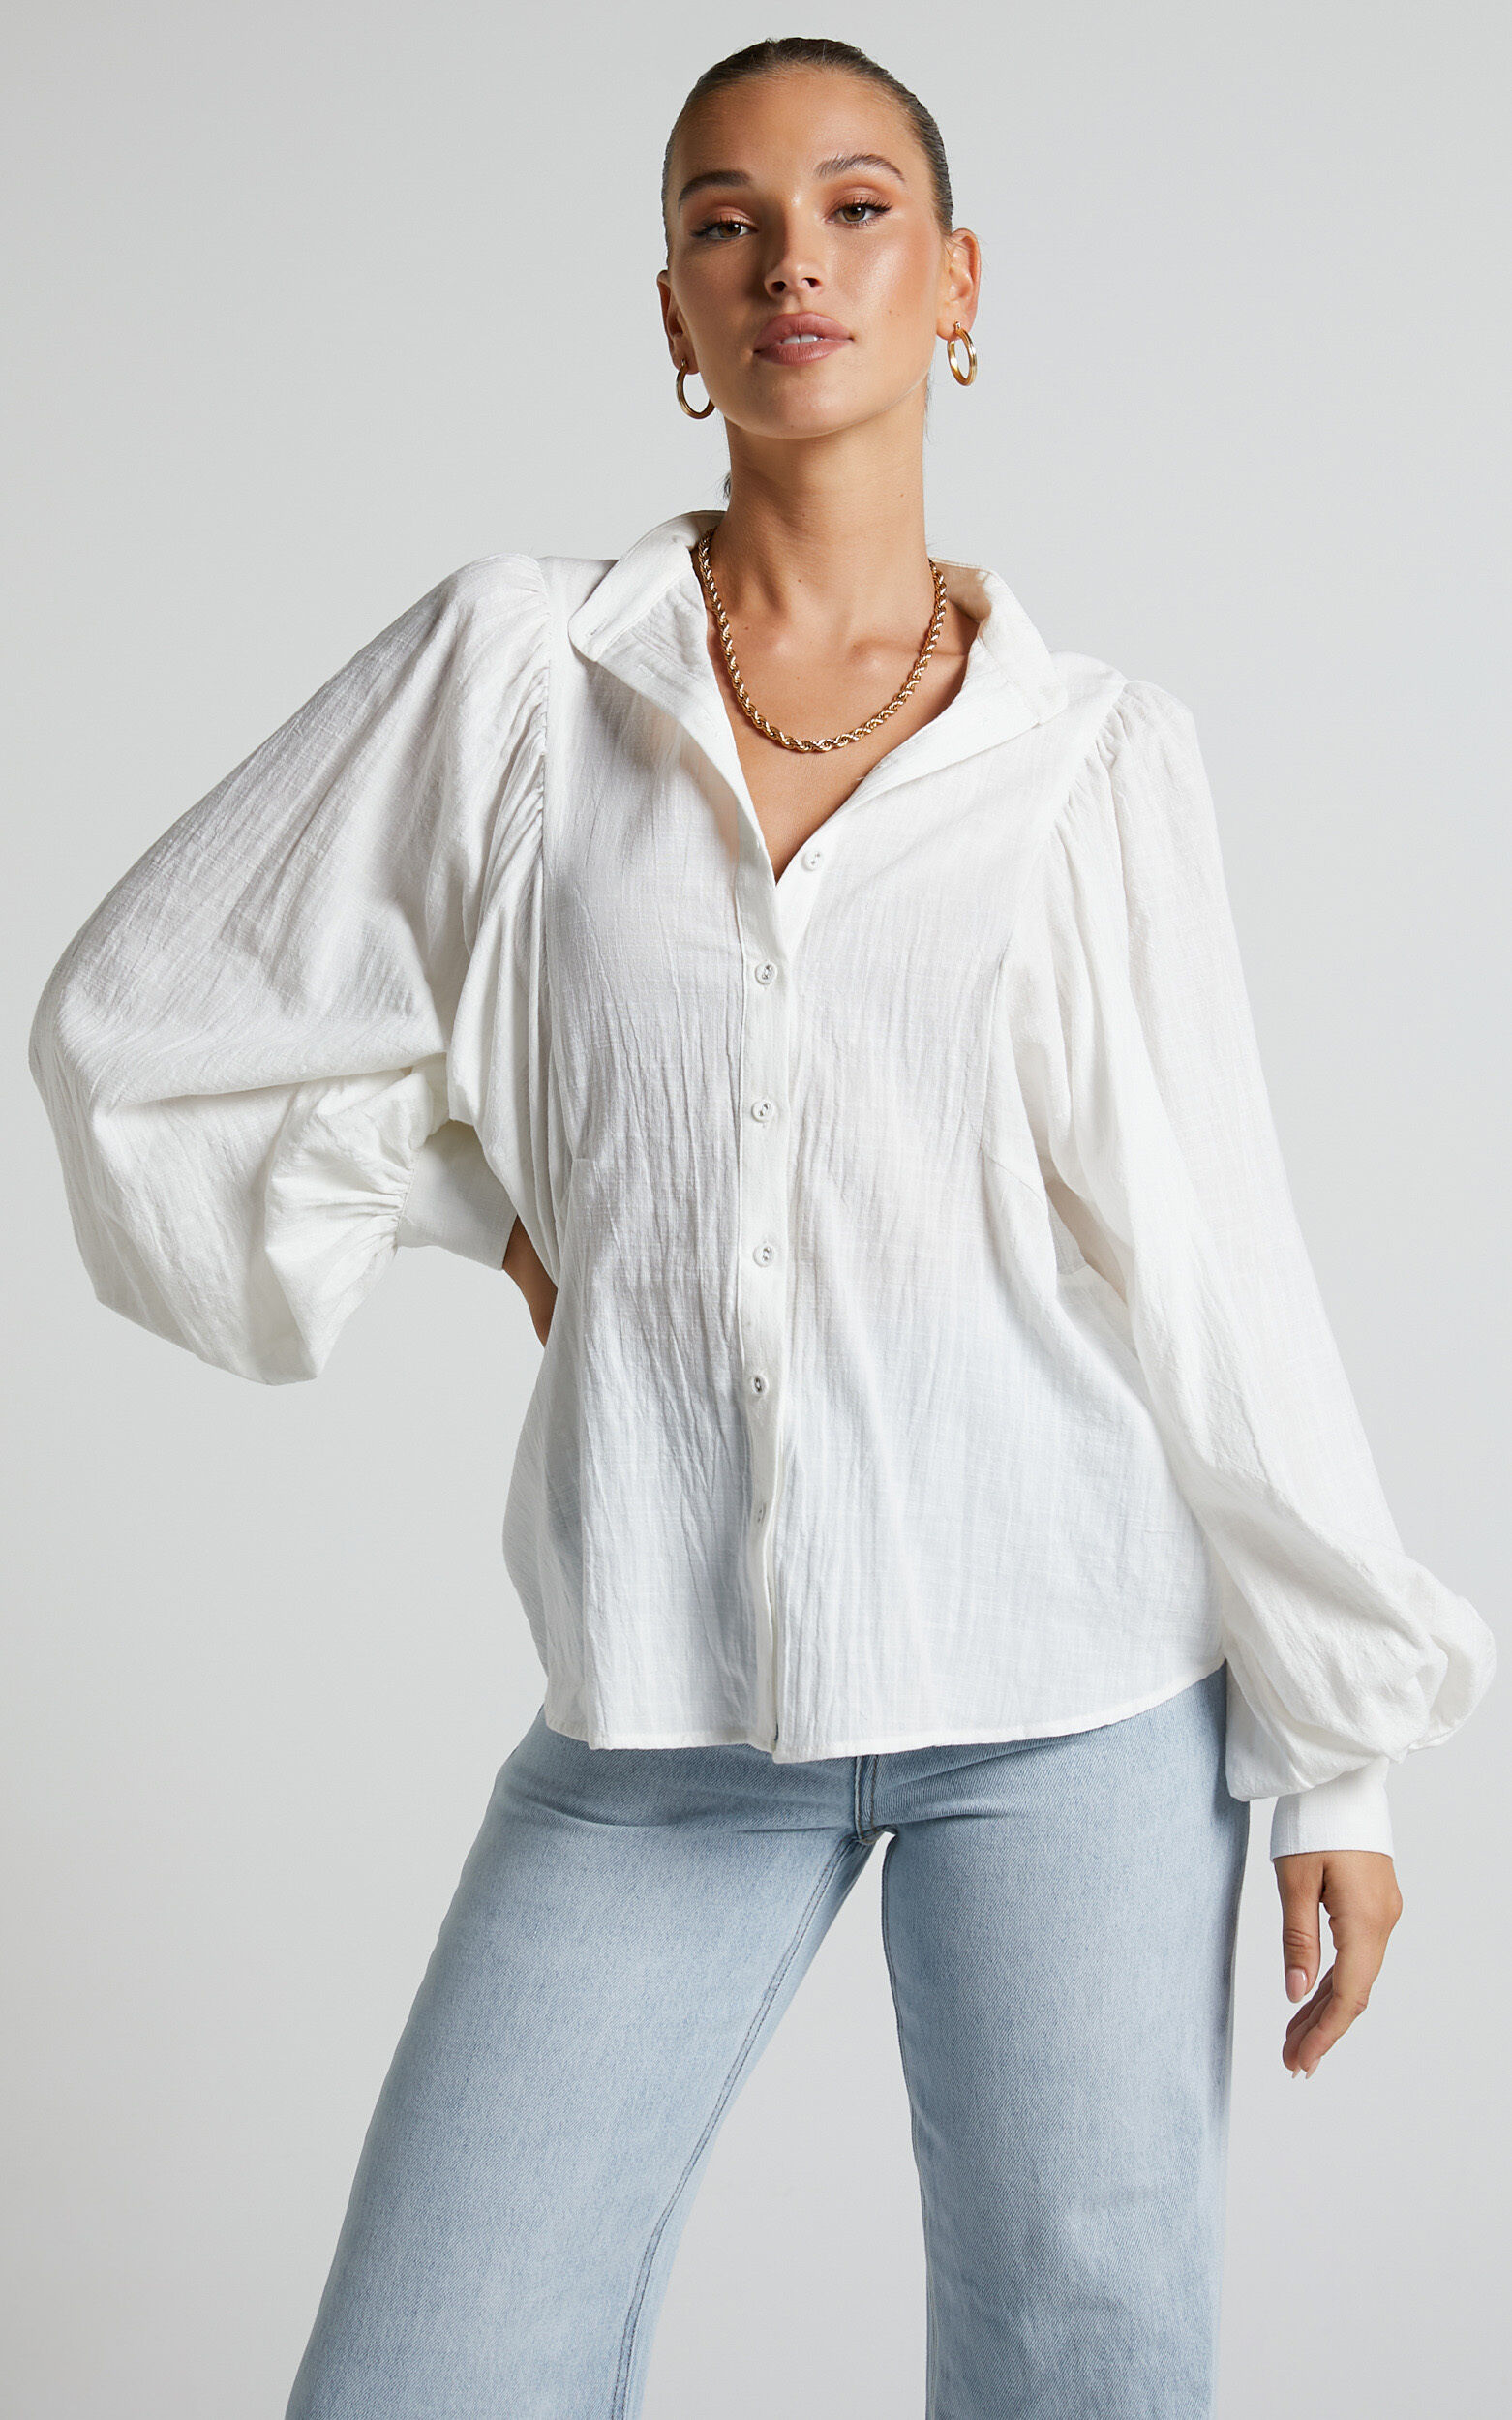 Sonyeta Balloon Sleeve Blouse in White - 06, WHT1, super-hi-res image number null